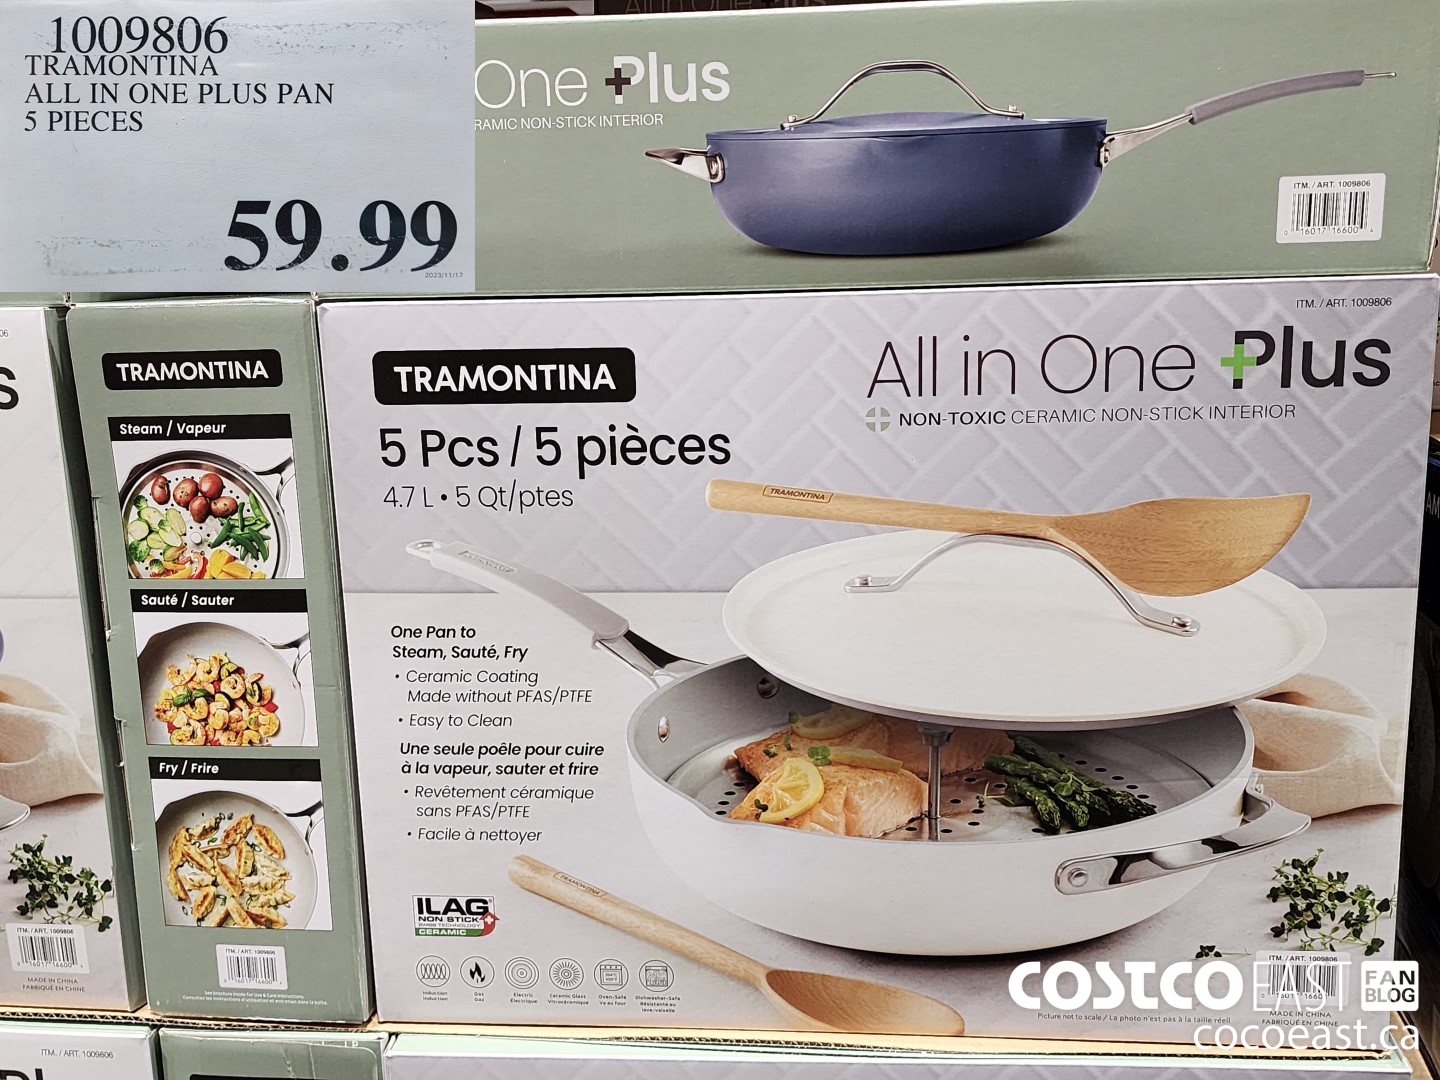 Tramontina 5 Pc Set All In One Plus